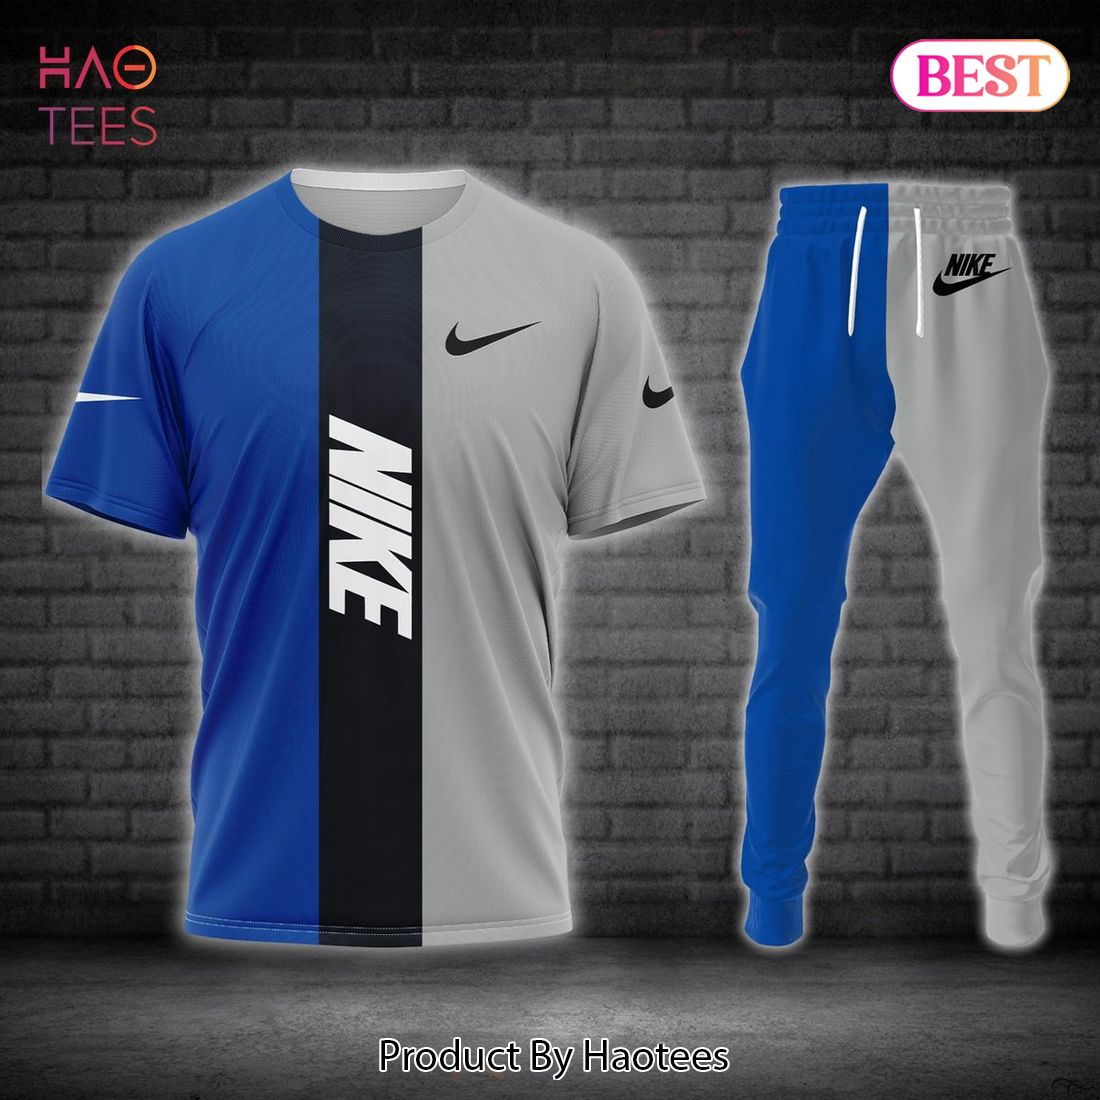 THE BEST Nike Blue Black Grey Luxury Brand T-Shirt And Pants Limited Edition